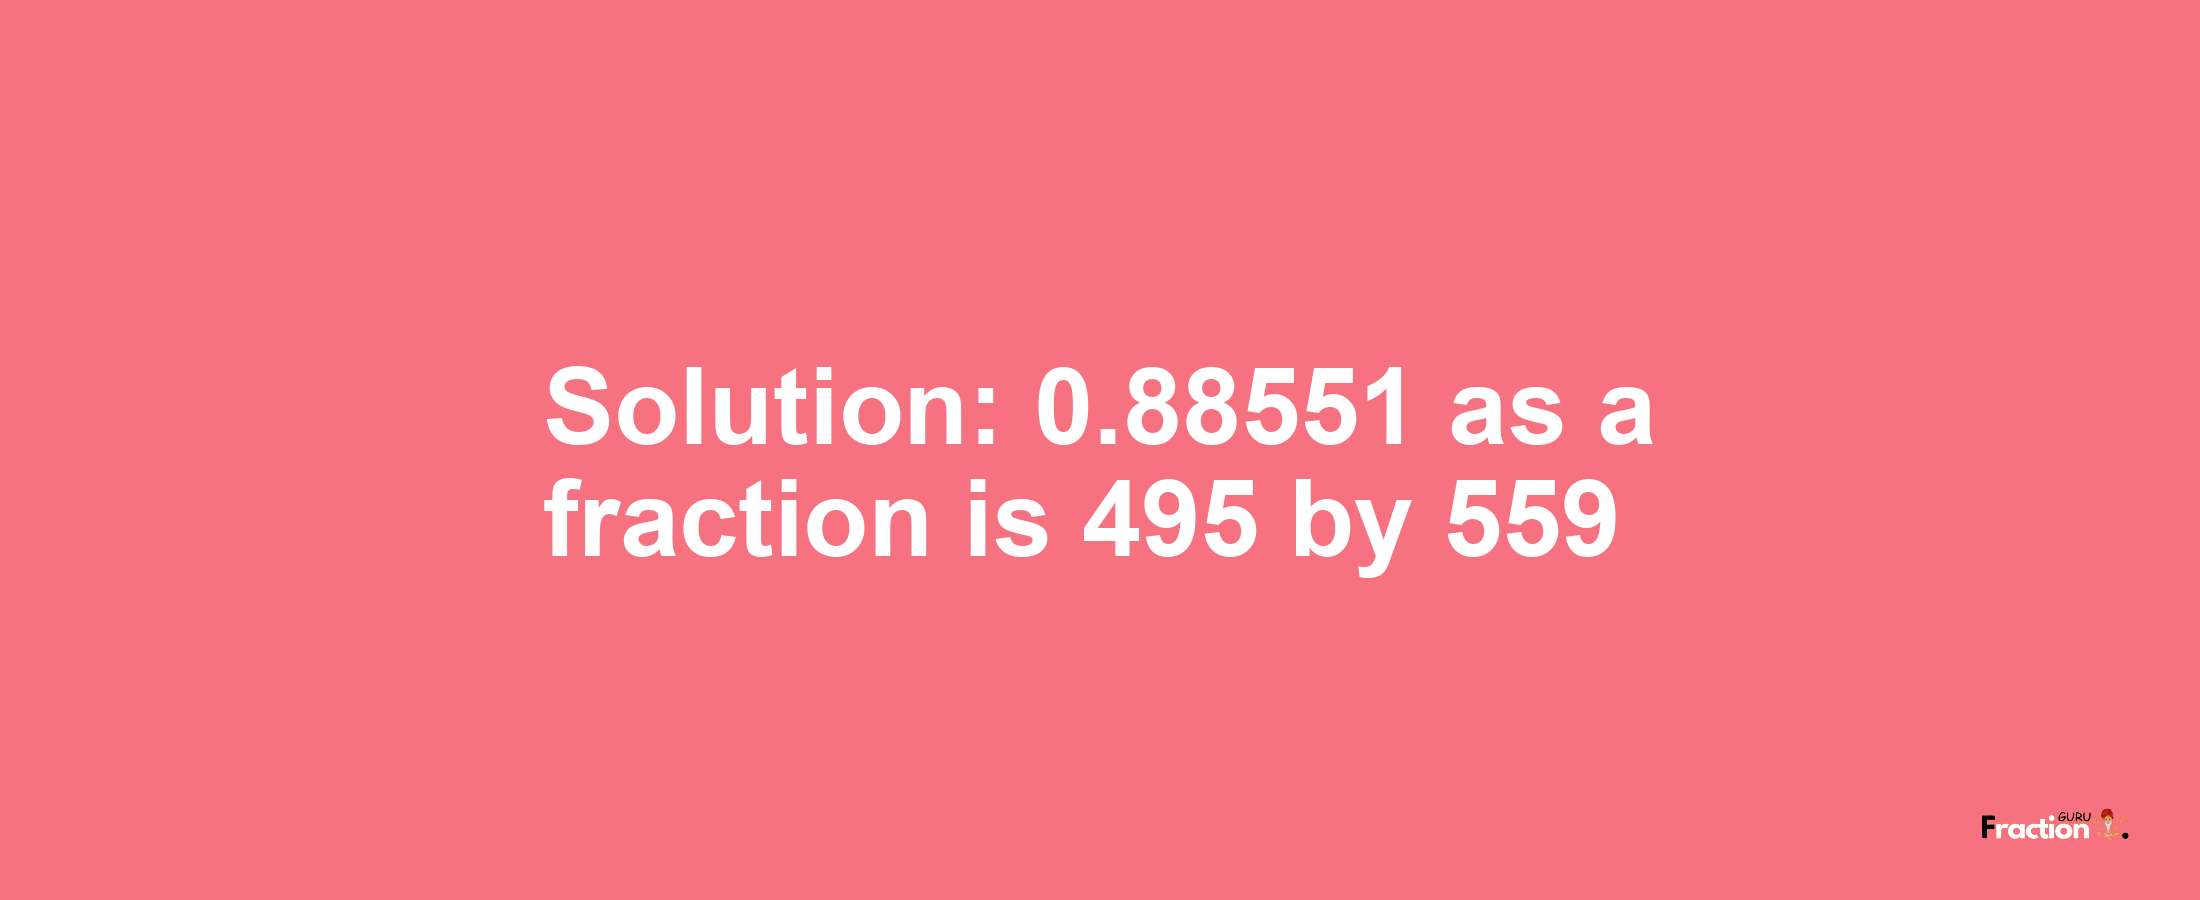 Solution:0.88551 as a fraction is 495/559